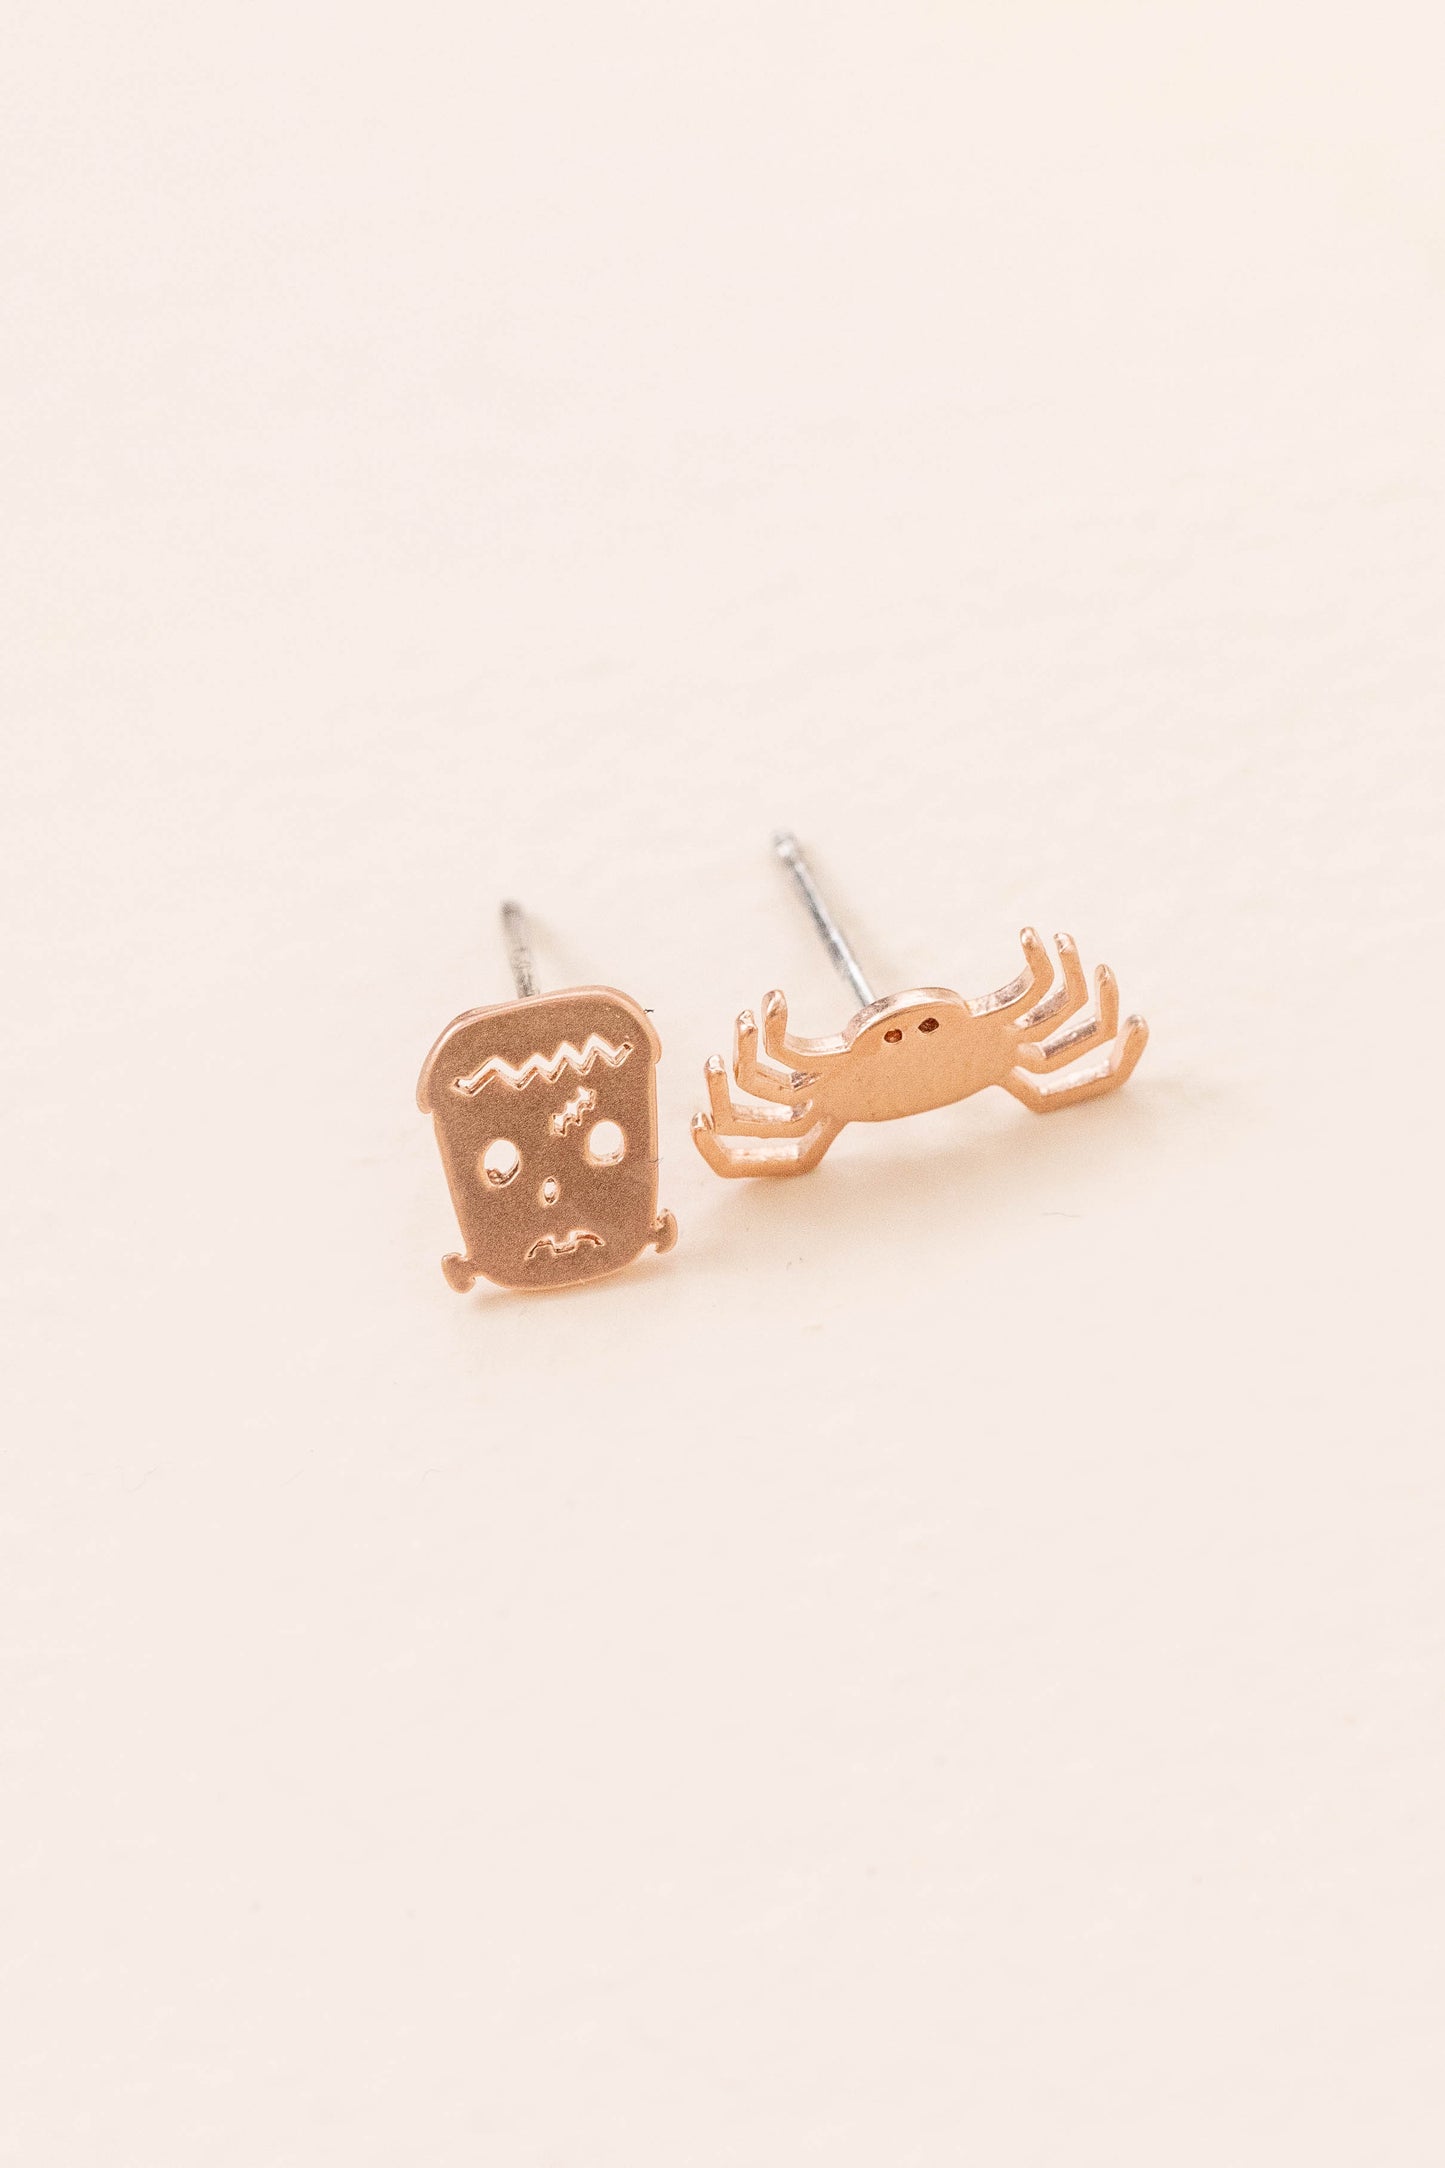 Frank and Spider Earrings